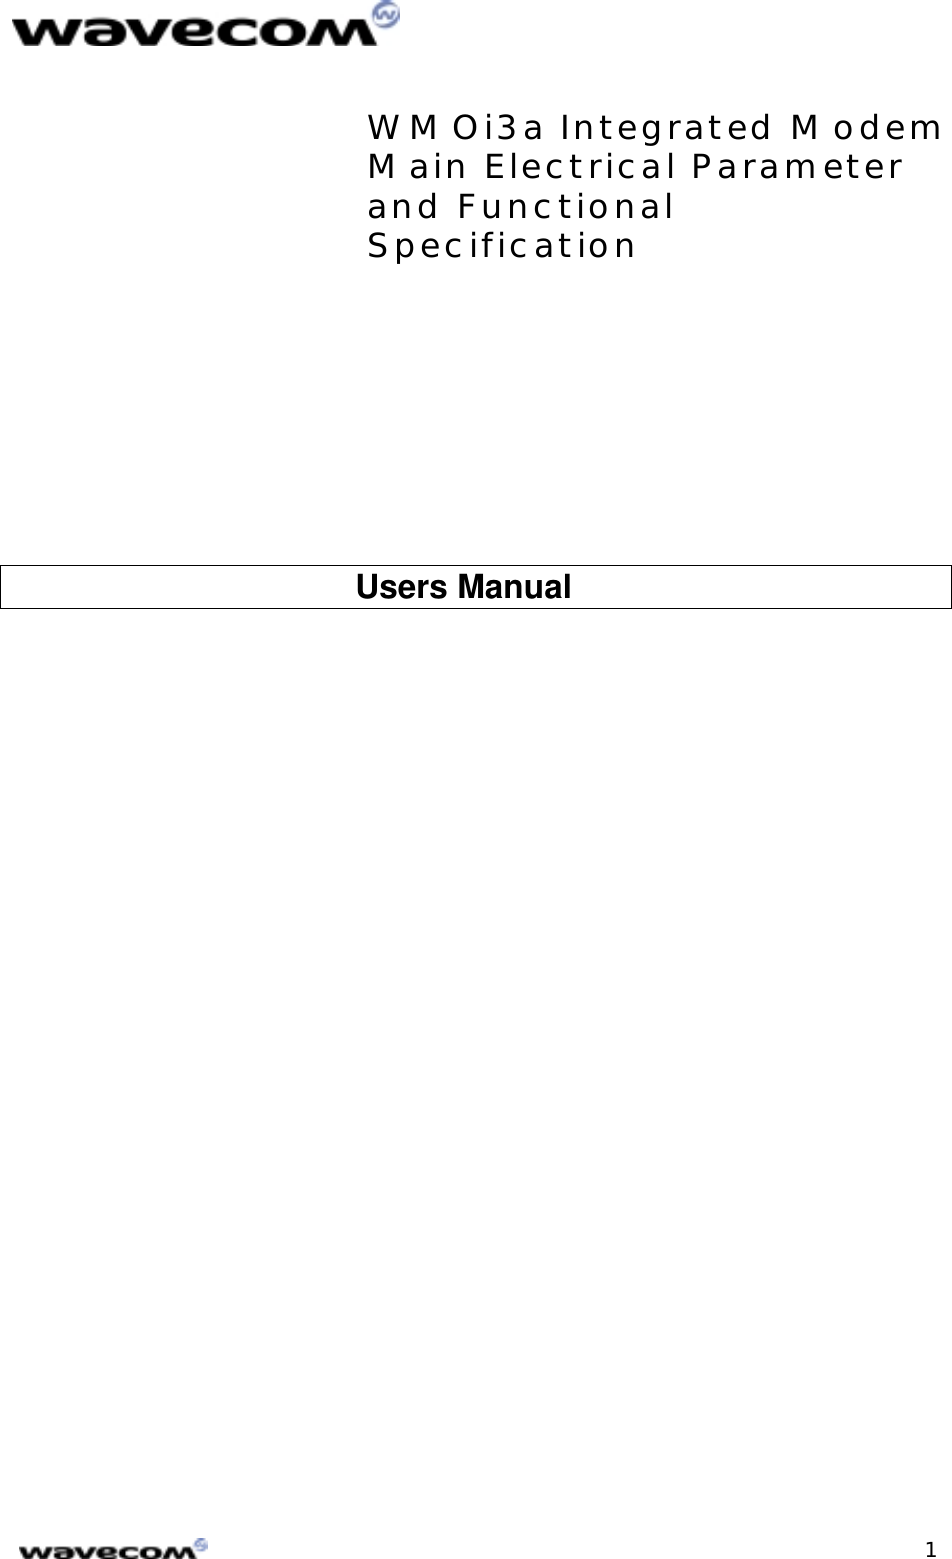 WMOi3a Integrated ModemMain Electrical Parameterand FunctionalSpecification 1                                     Users Manual